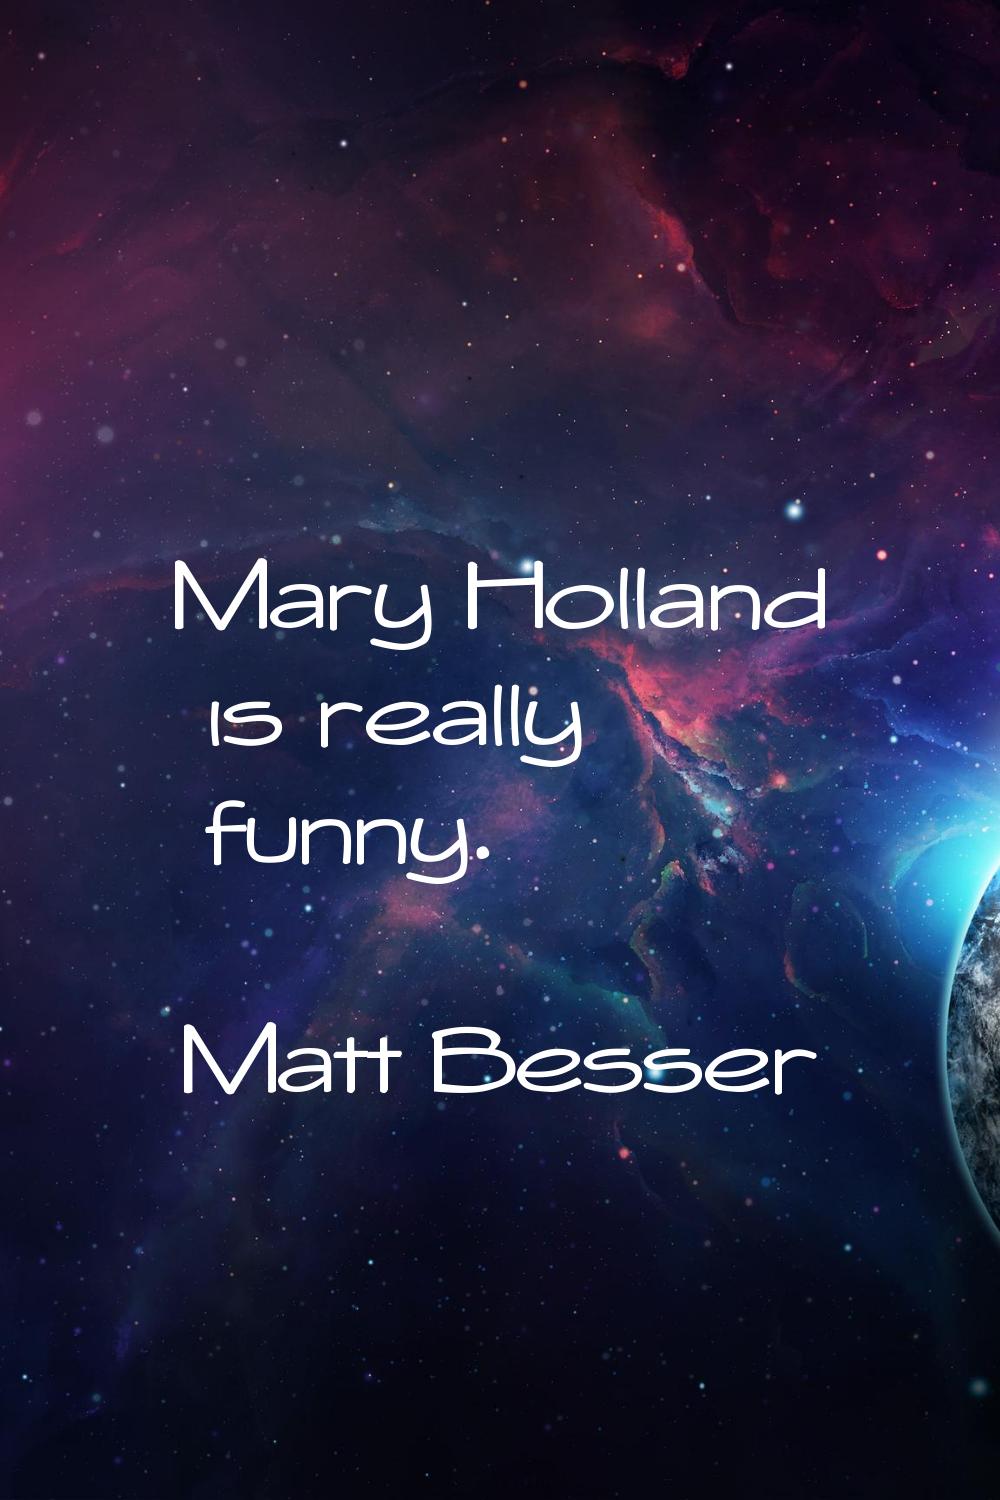 Mary Holland is really funny.